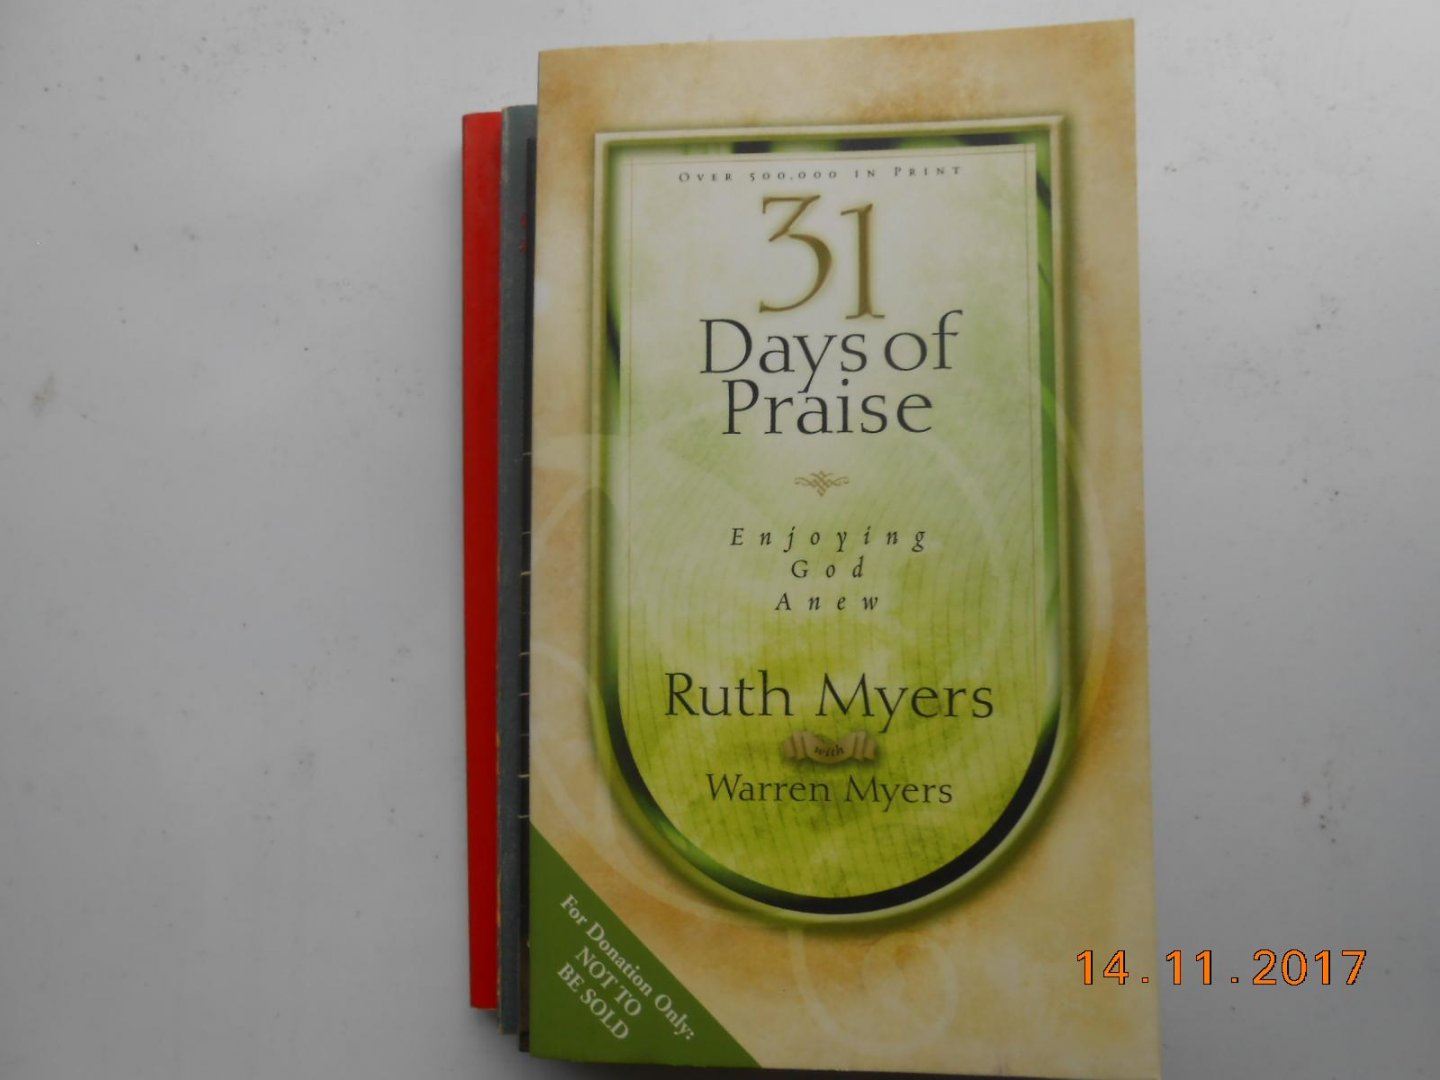 Ruth Myers - 31 Days of Praise